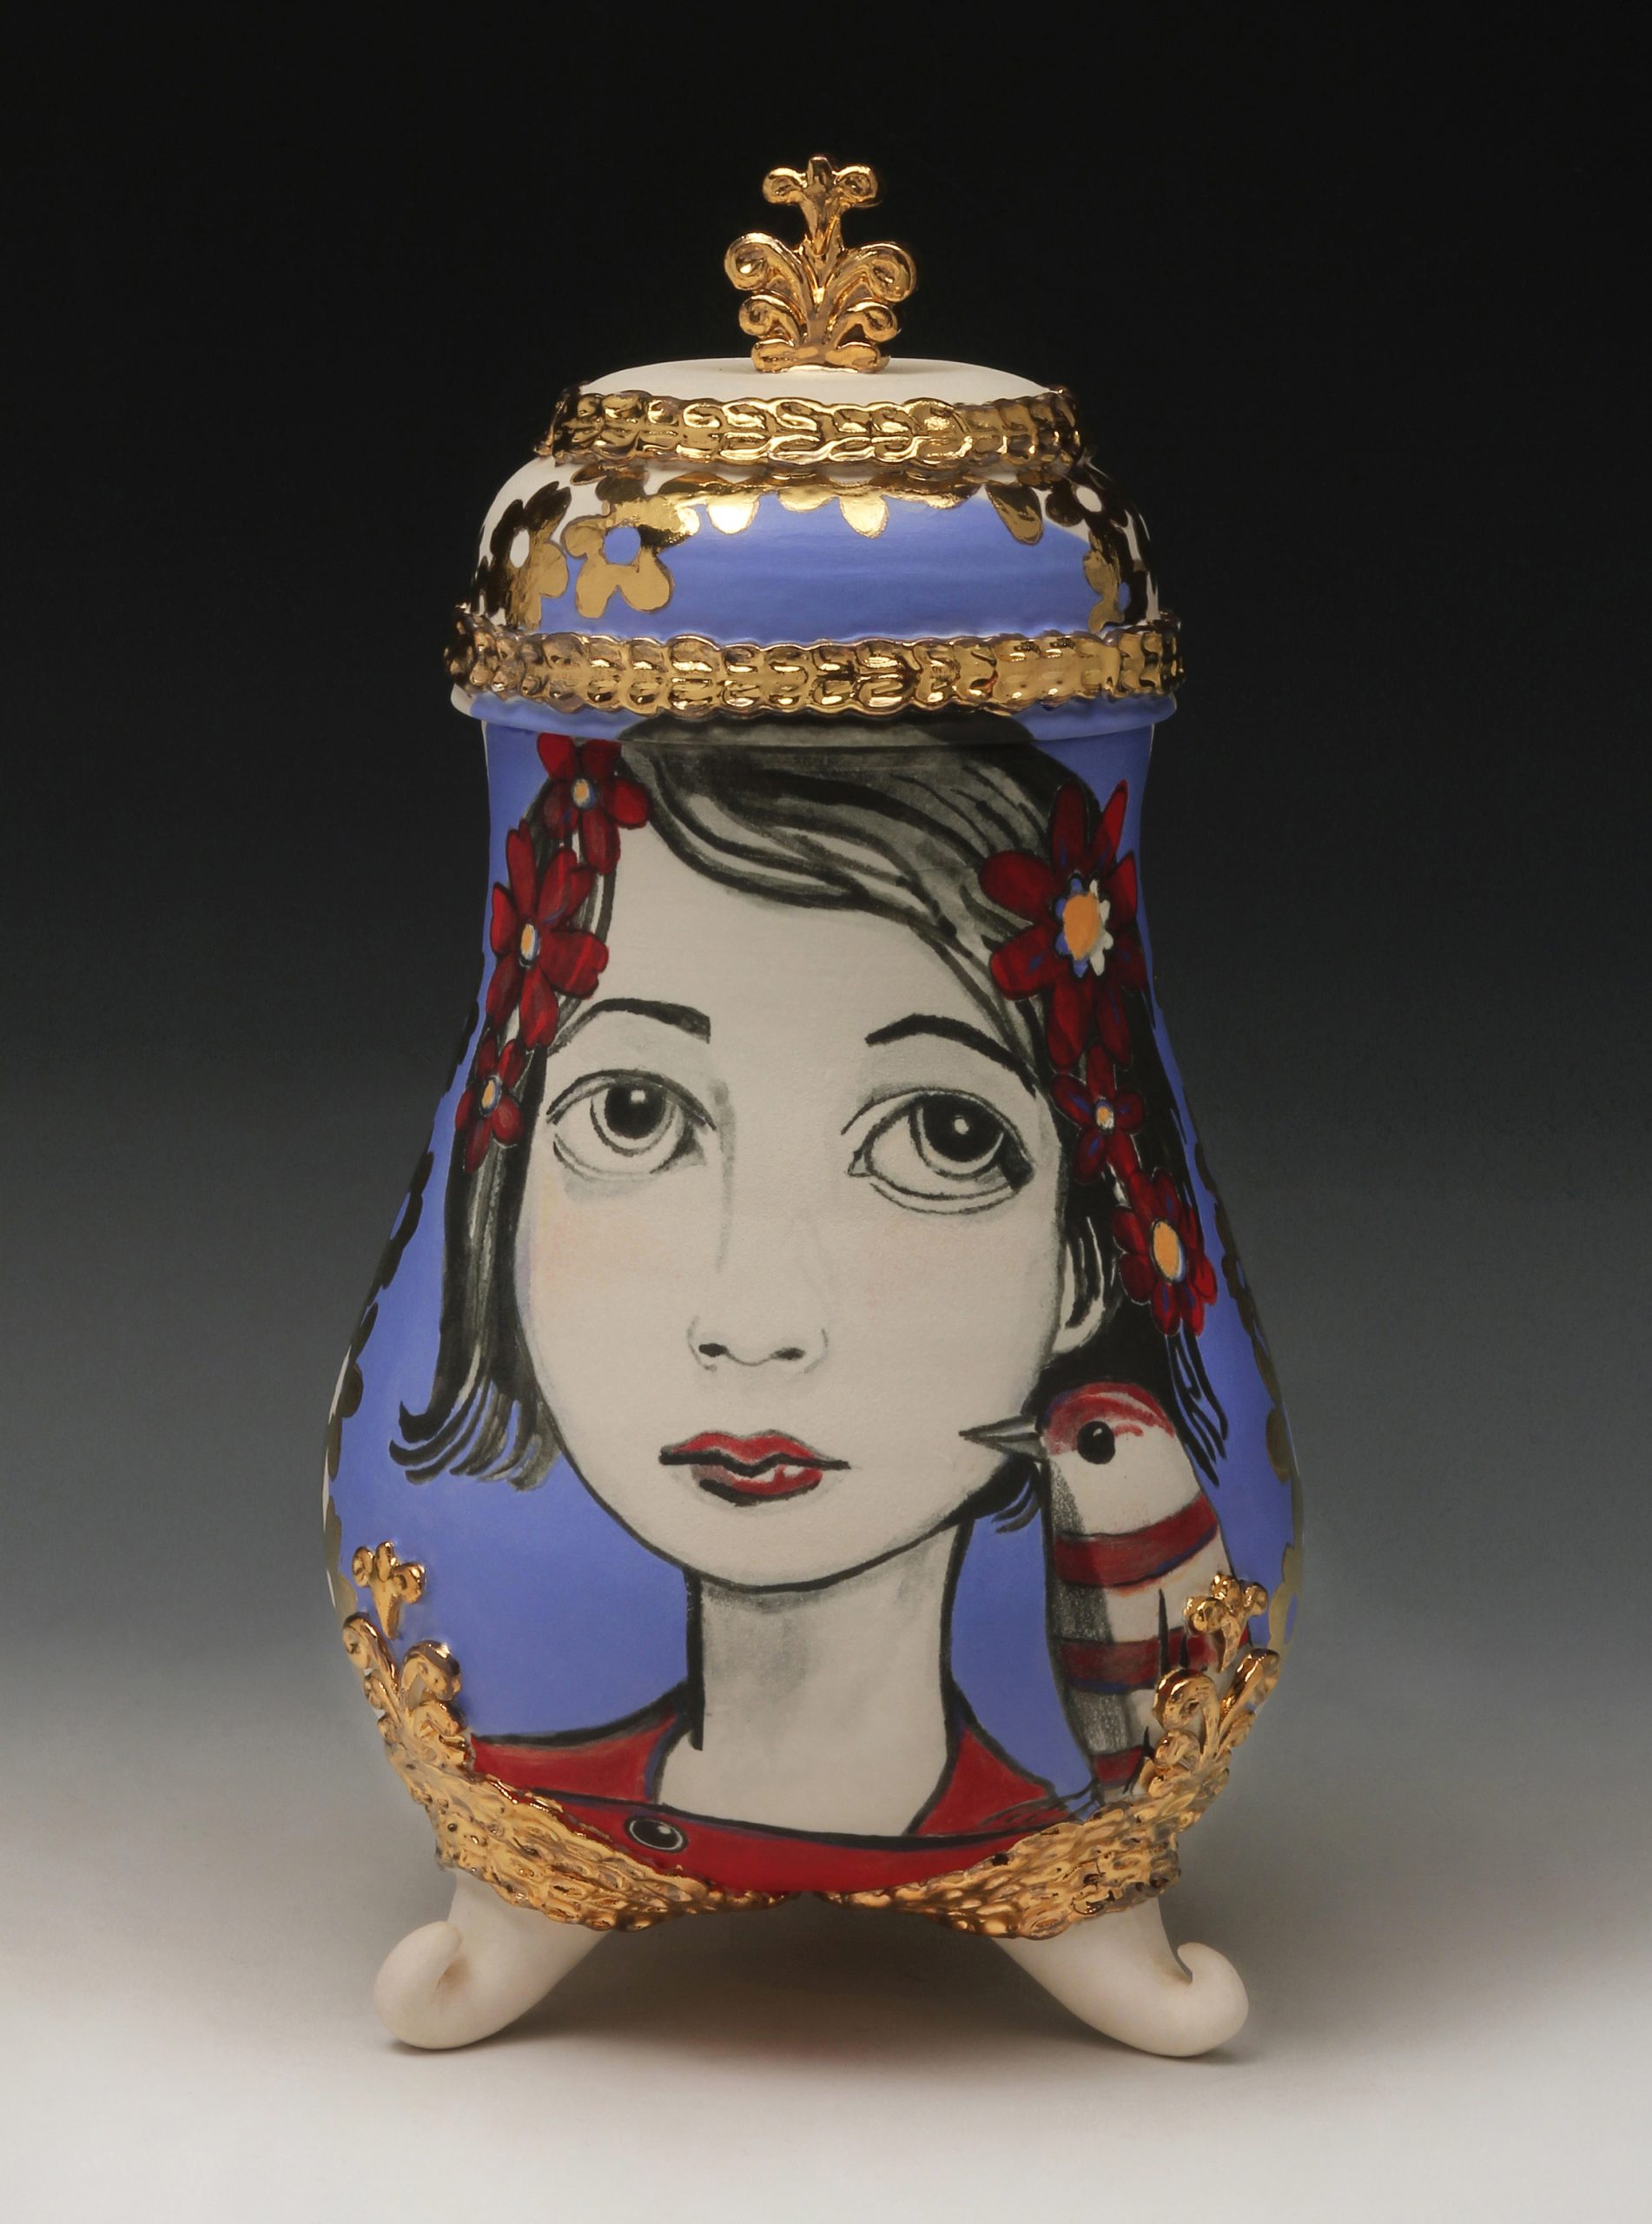 Kimberly Cook, Me and My Teabird, 11 in. (28 cm) in height, porcelain, underglaze, fired to cone 6, gold luster